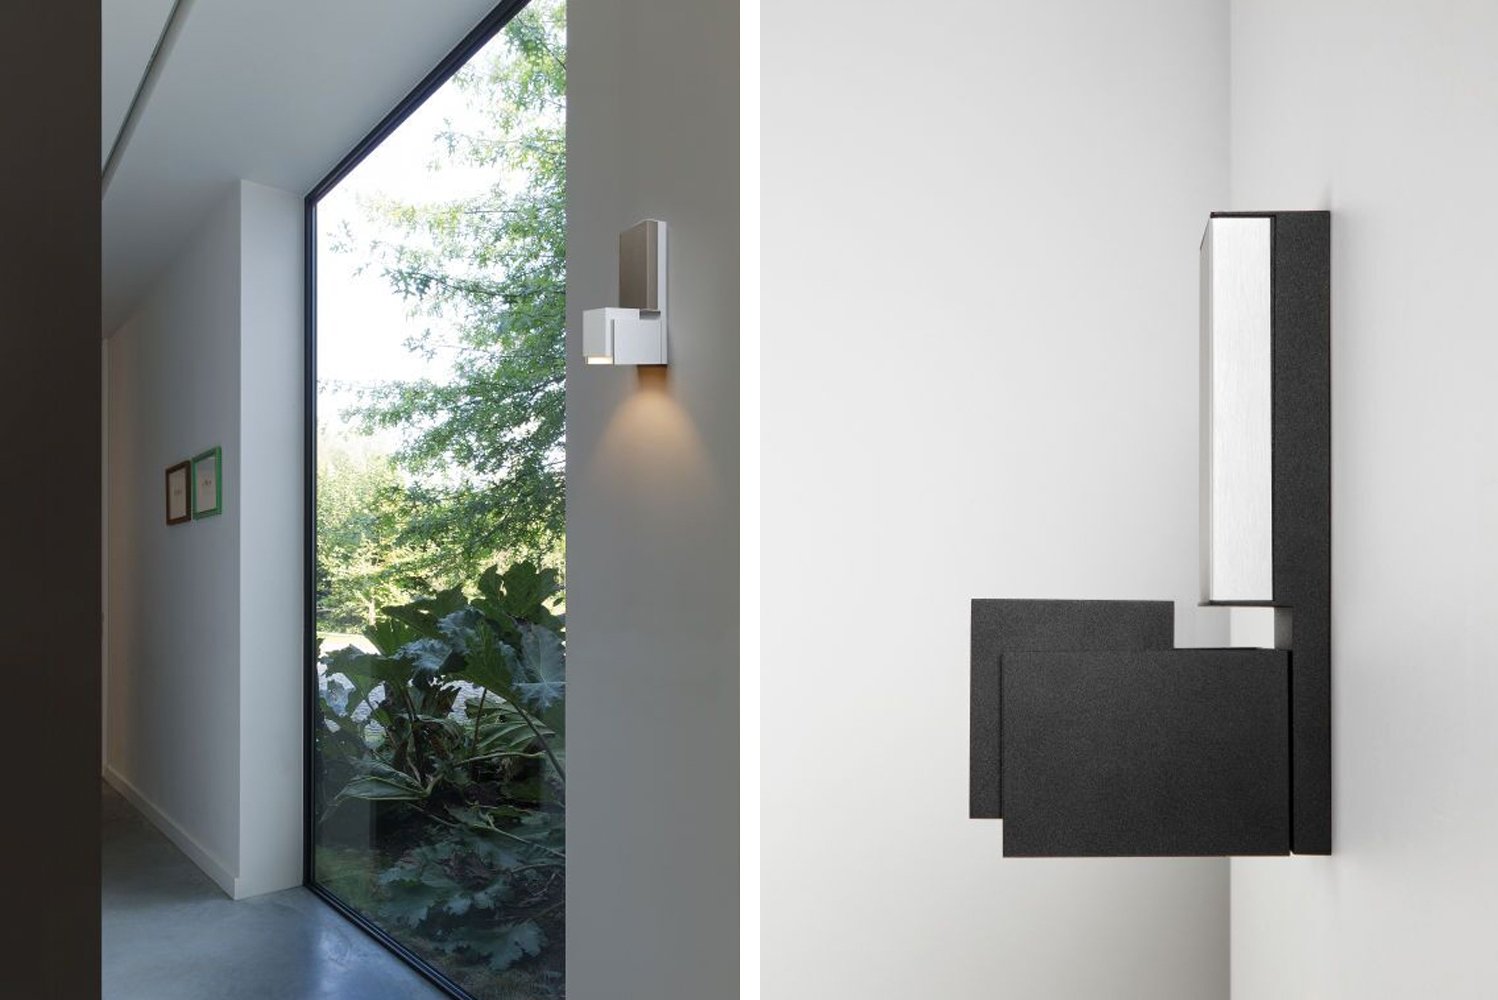 Rektor is a flexible luminaire that can be specified as tracklighting or wall sconces in a variety of configurations 